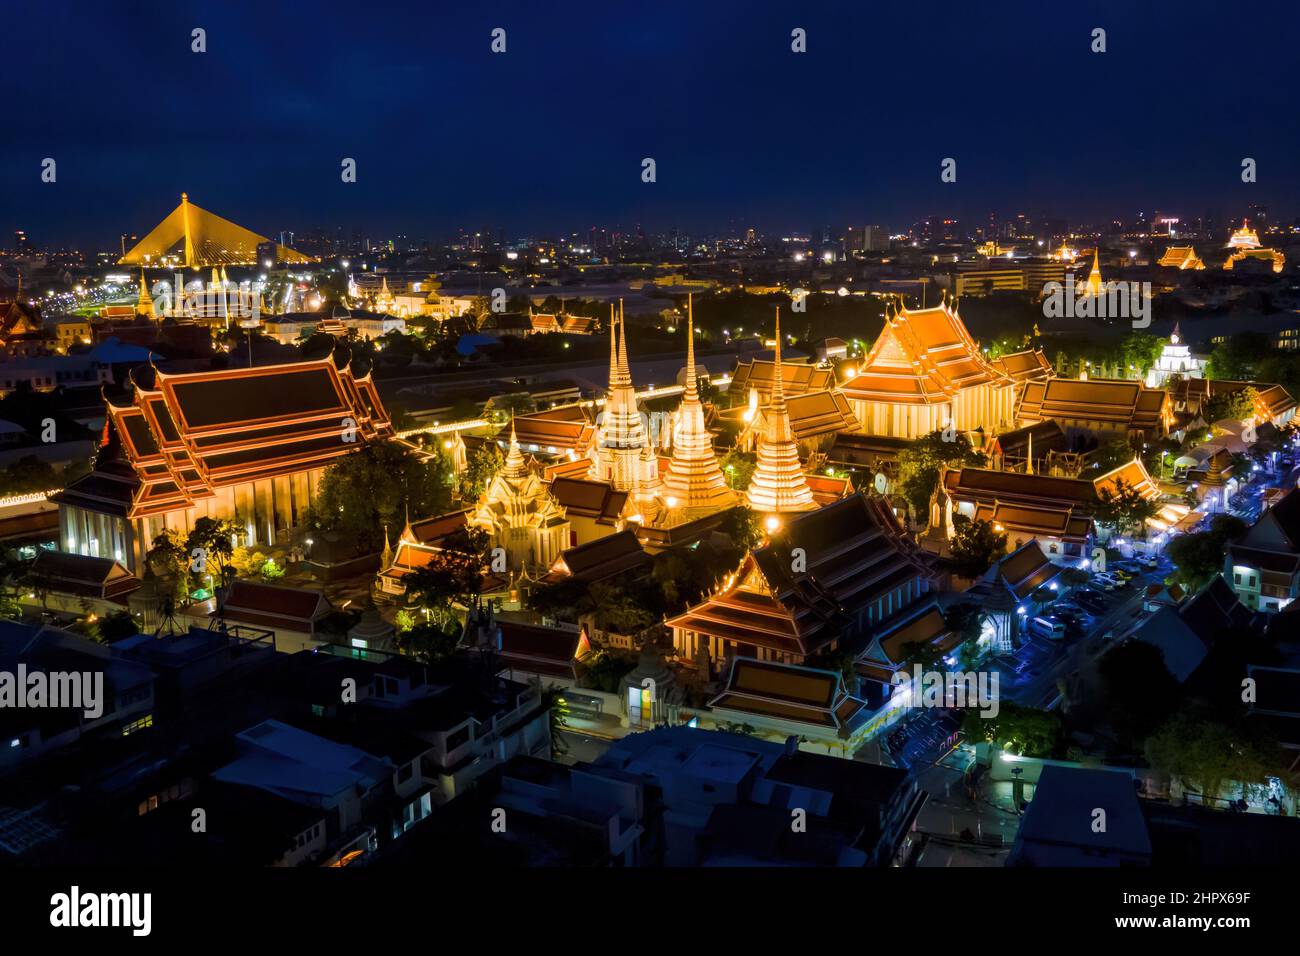 (EDITOR'S NOTE: Image taken with drone)Aerial view of the Grand Palace in Bangkok. Two of Thailand's most famous cultural heritage sites and tourist attractions, Wat Arun (Temple of Dawn) and The Grand Palace, are illuminated at night along the Chao Praya River in Bangkok. The Thai Government recently announced eased entry requirements for international tourists visiting Thailand amidst a surge in the Omicron variant of COVID-19 throughout the country, with cases topping 20,000 reported infections per day. (Photo by Matt Hunt/SOPA Images/Sipa USA) Stock Photo